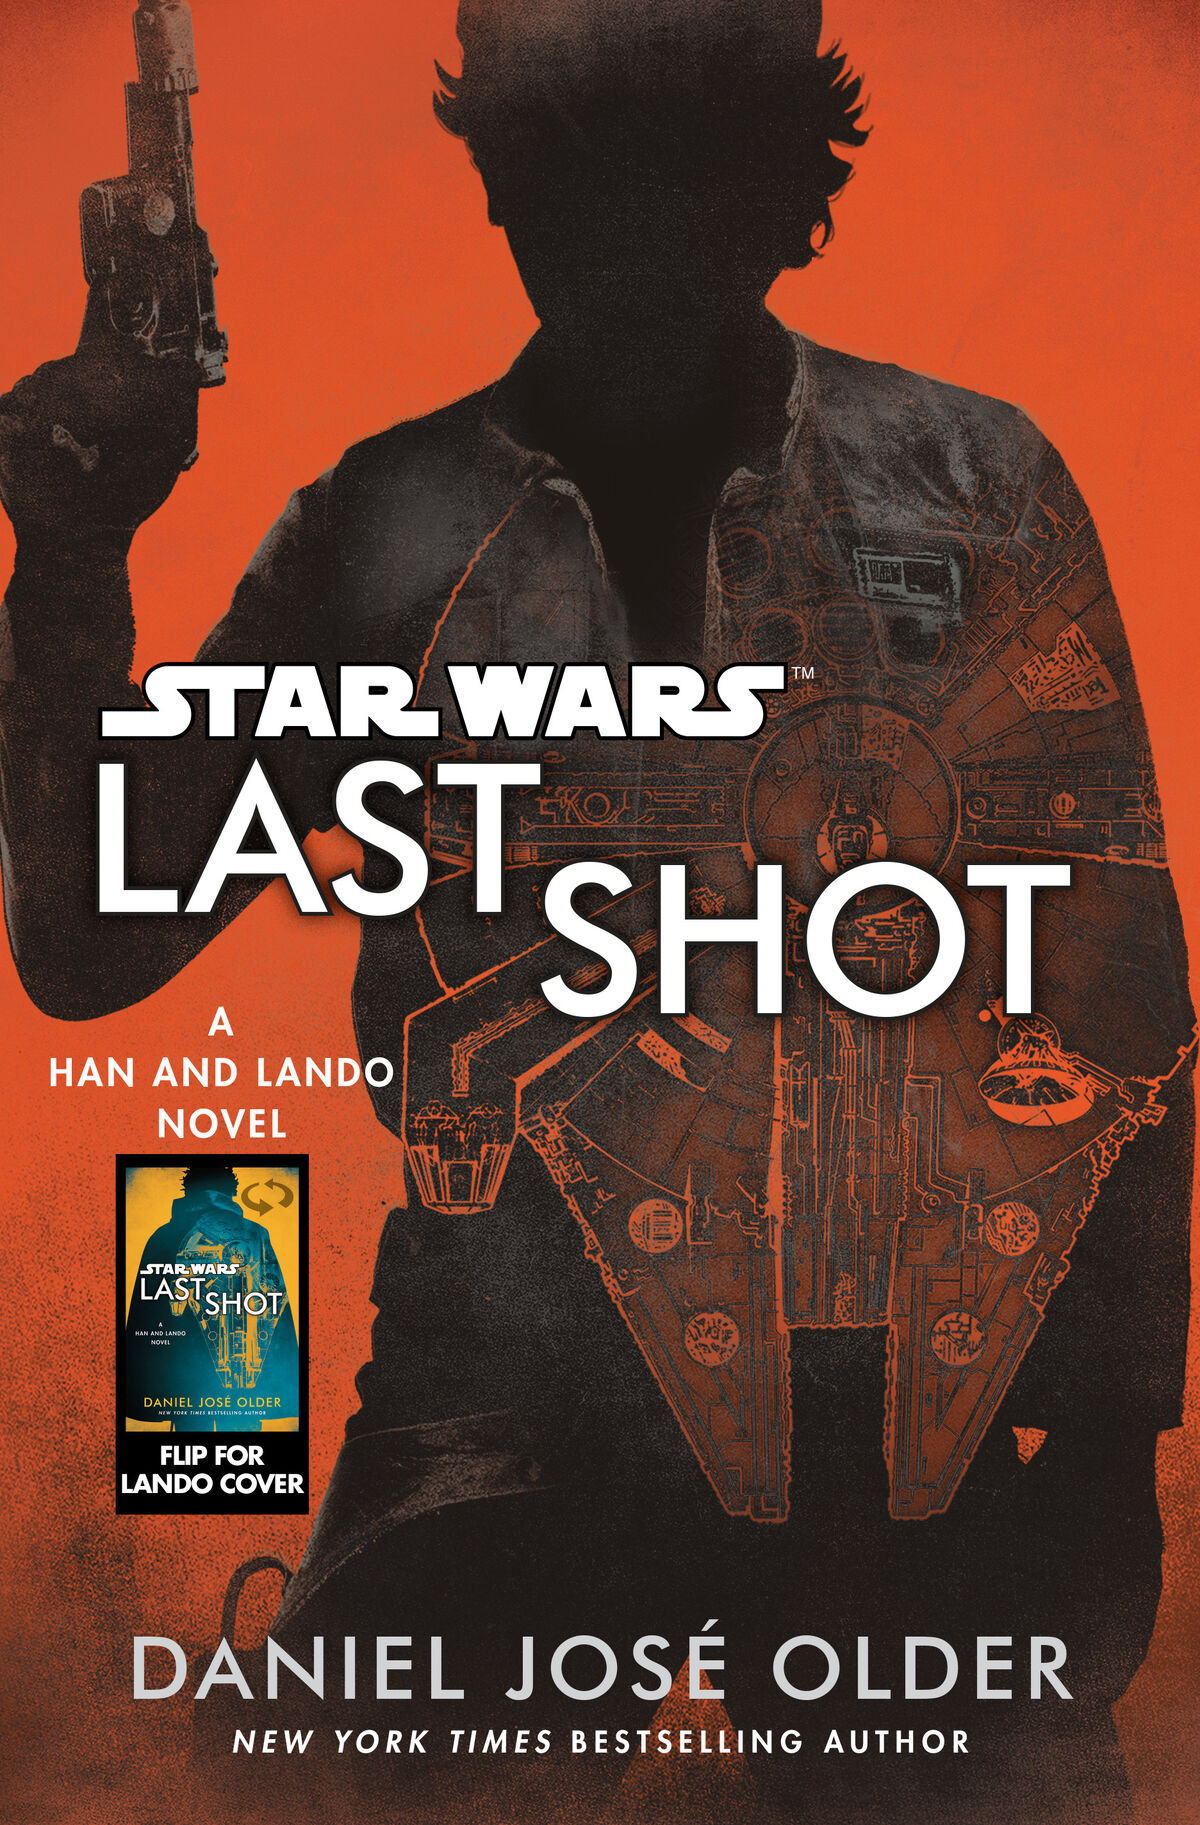 https://static.wikia.nocookie.net/starwars/images/4/49/Last_Shot_Han_cover.jpg/revision/latest/scale-to-width-down/1200?cb=20180416204915